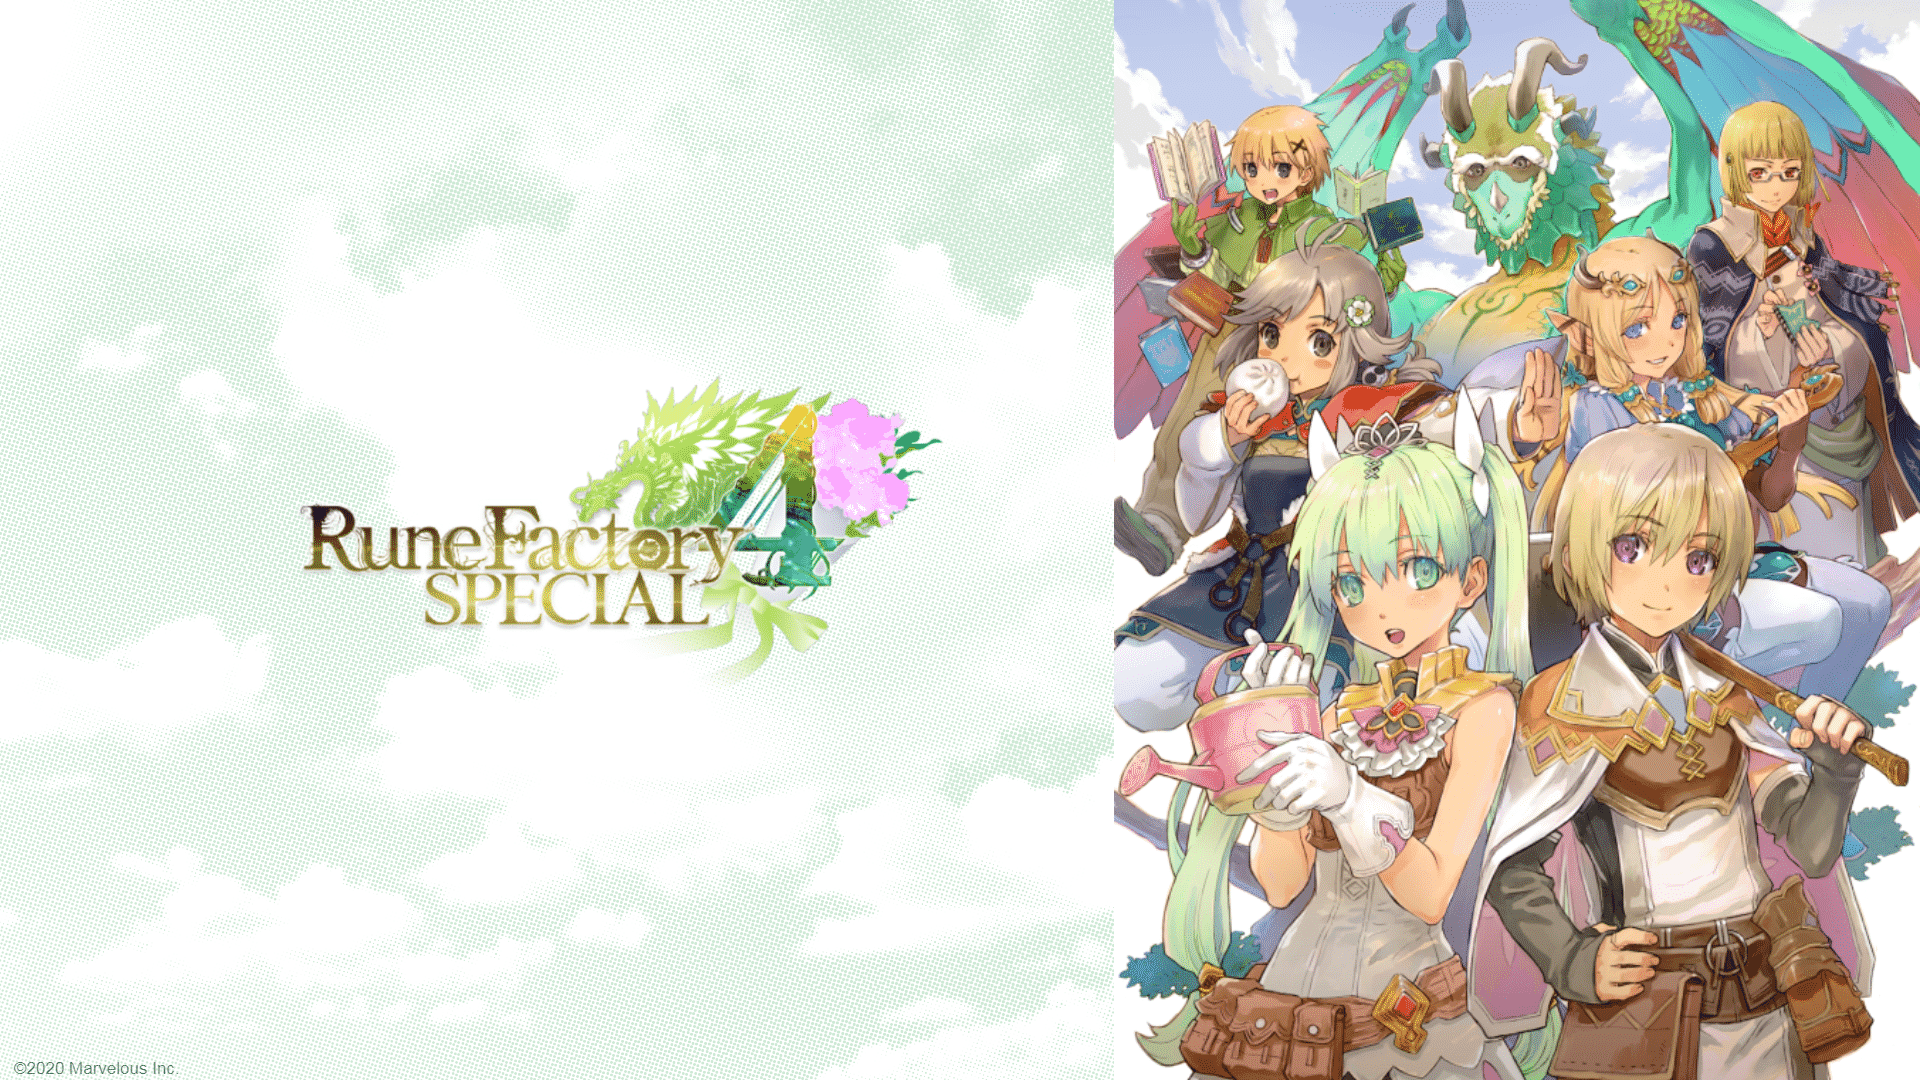 Rune Factory 4 Special Switch Review .butwhythopodcast.com